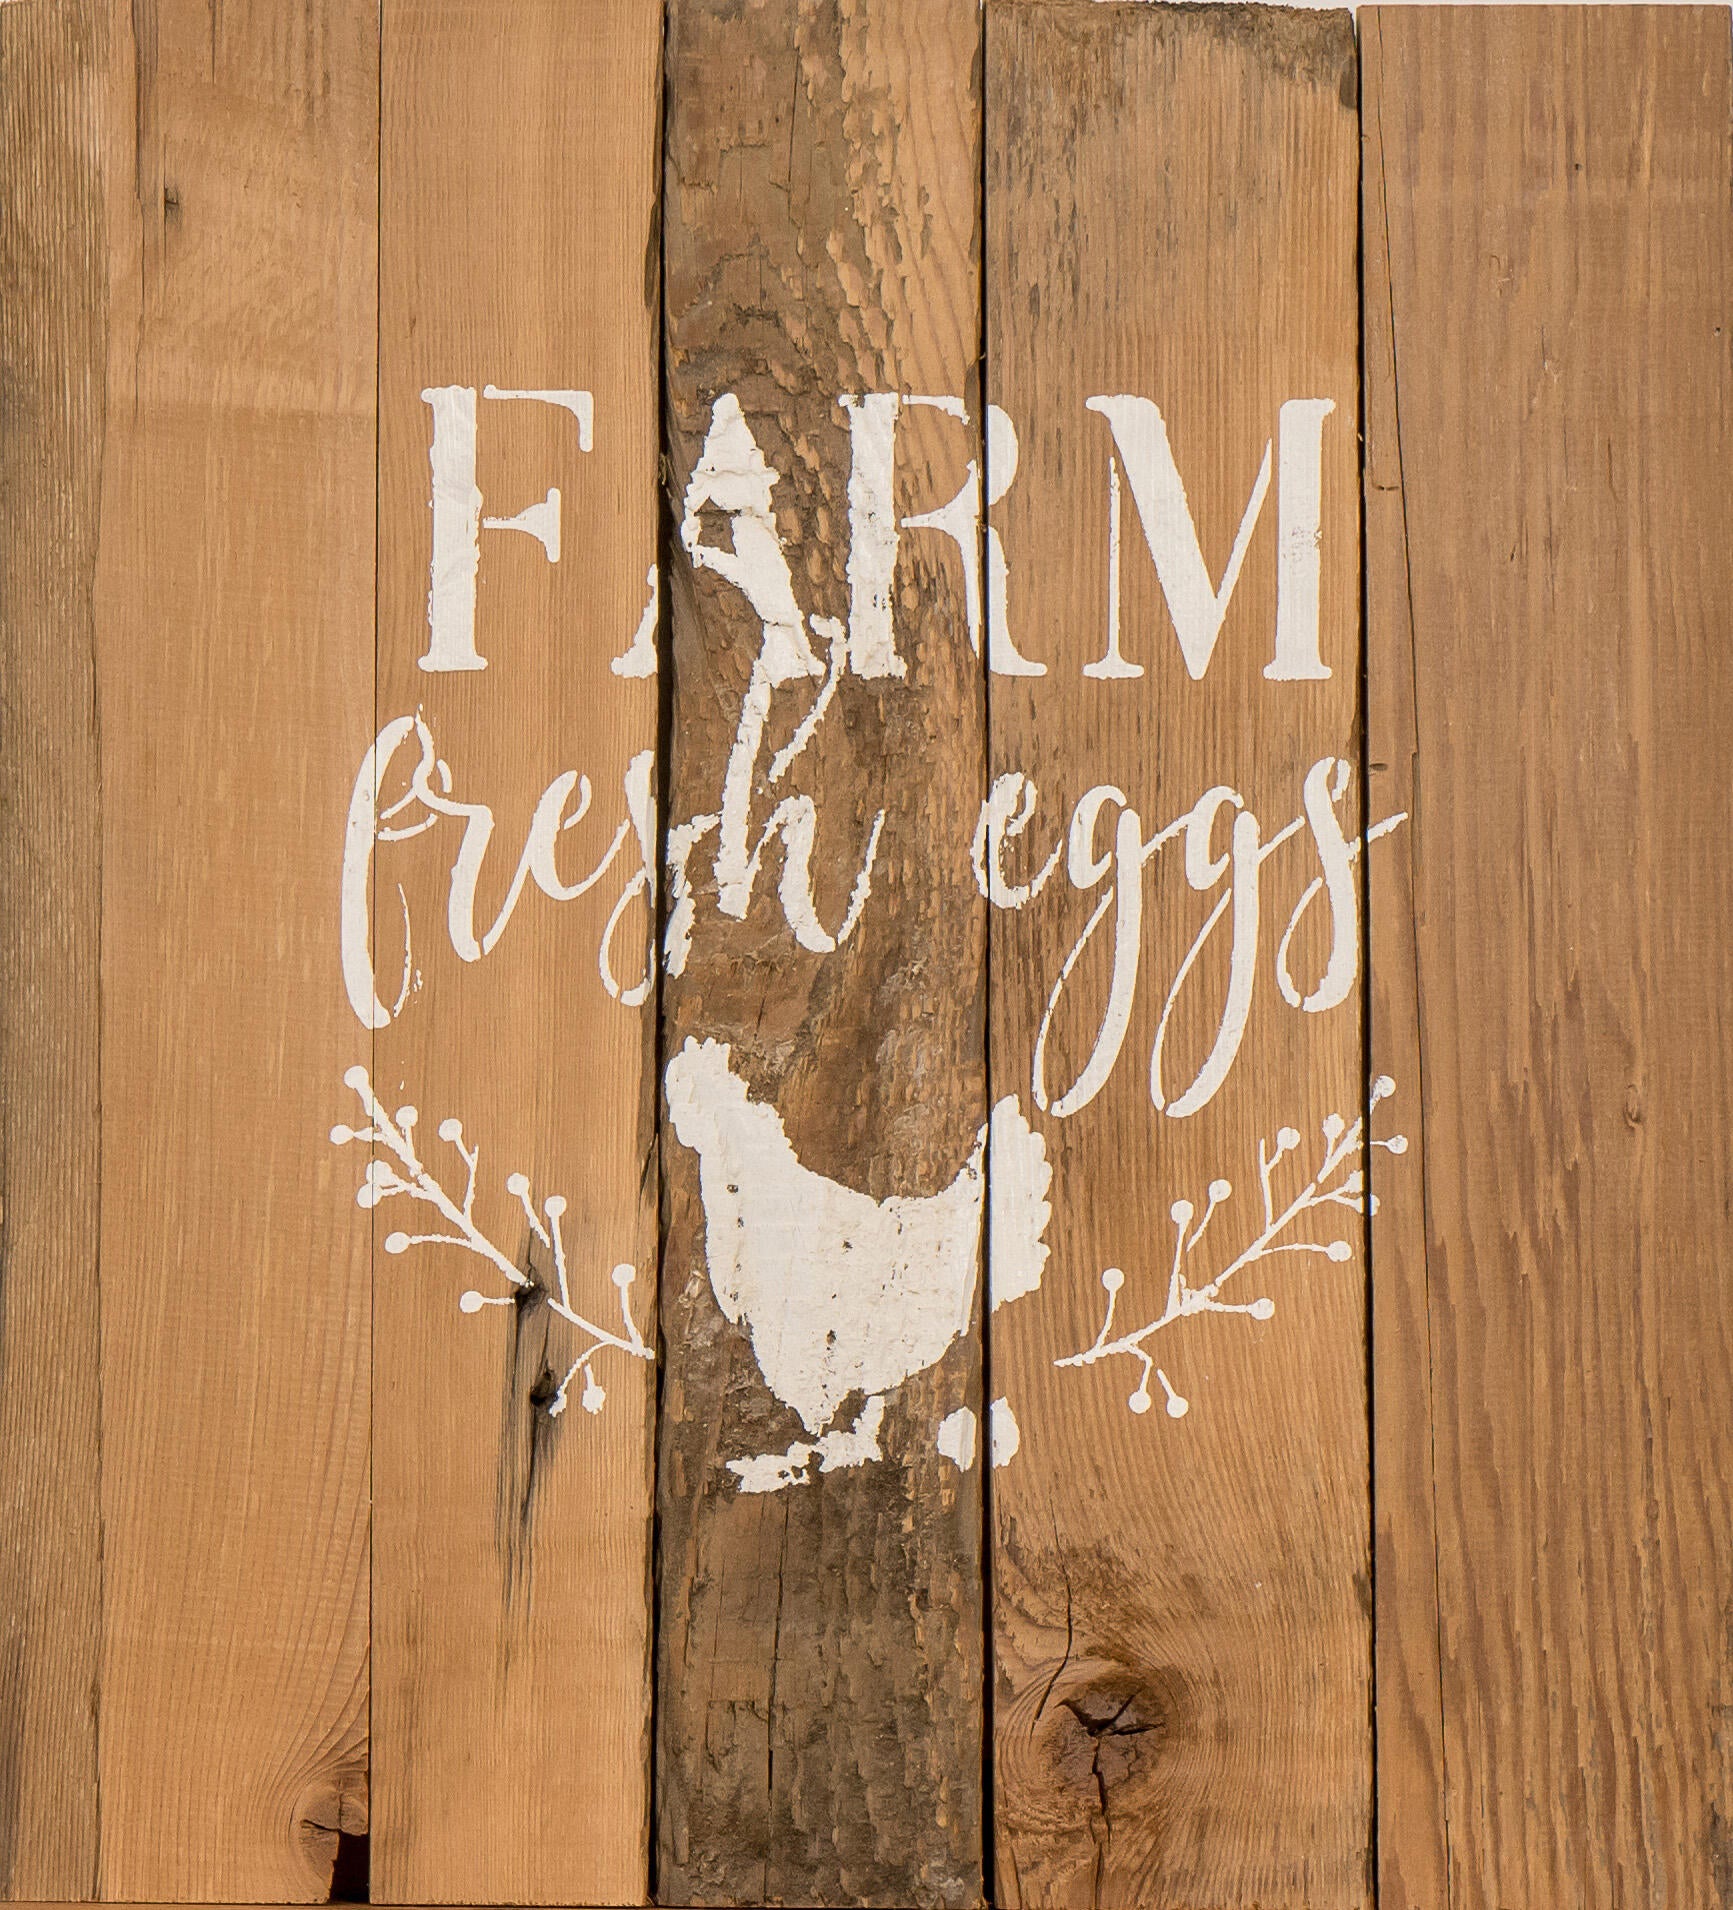 close up of stamped paint design centered on natural and reclaimed barnwood strips put together to create a sign. Design reads Farm Fresh Eggs with a chicken laying an egg underneath underneath and simple florals on either side of the chicken. Wood has distressed characteristics.